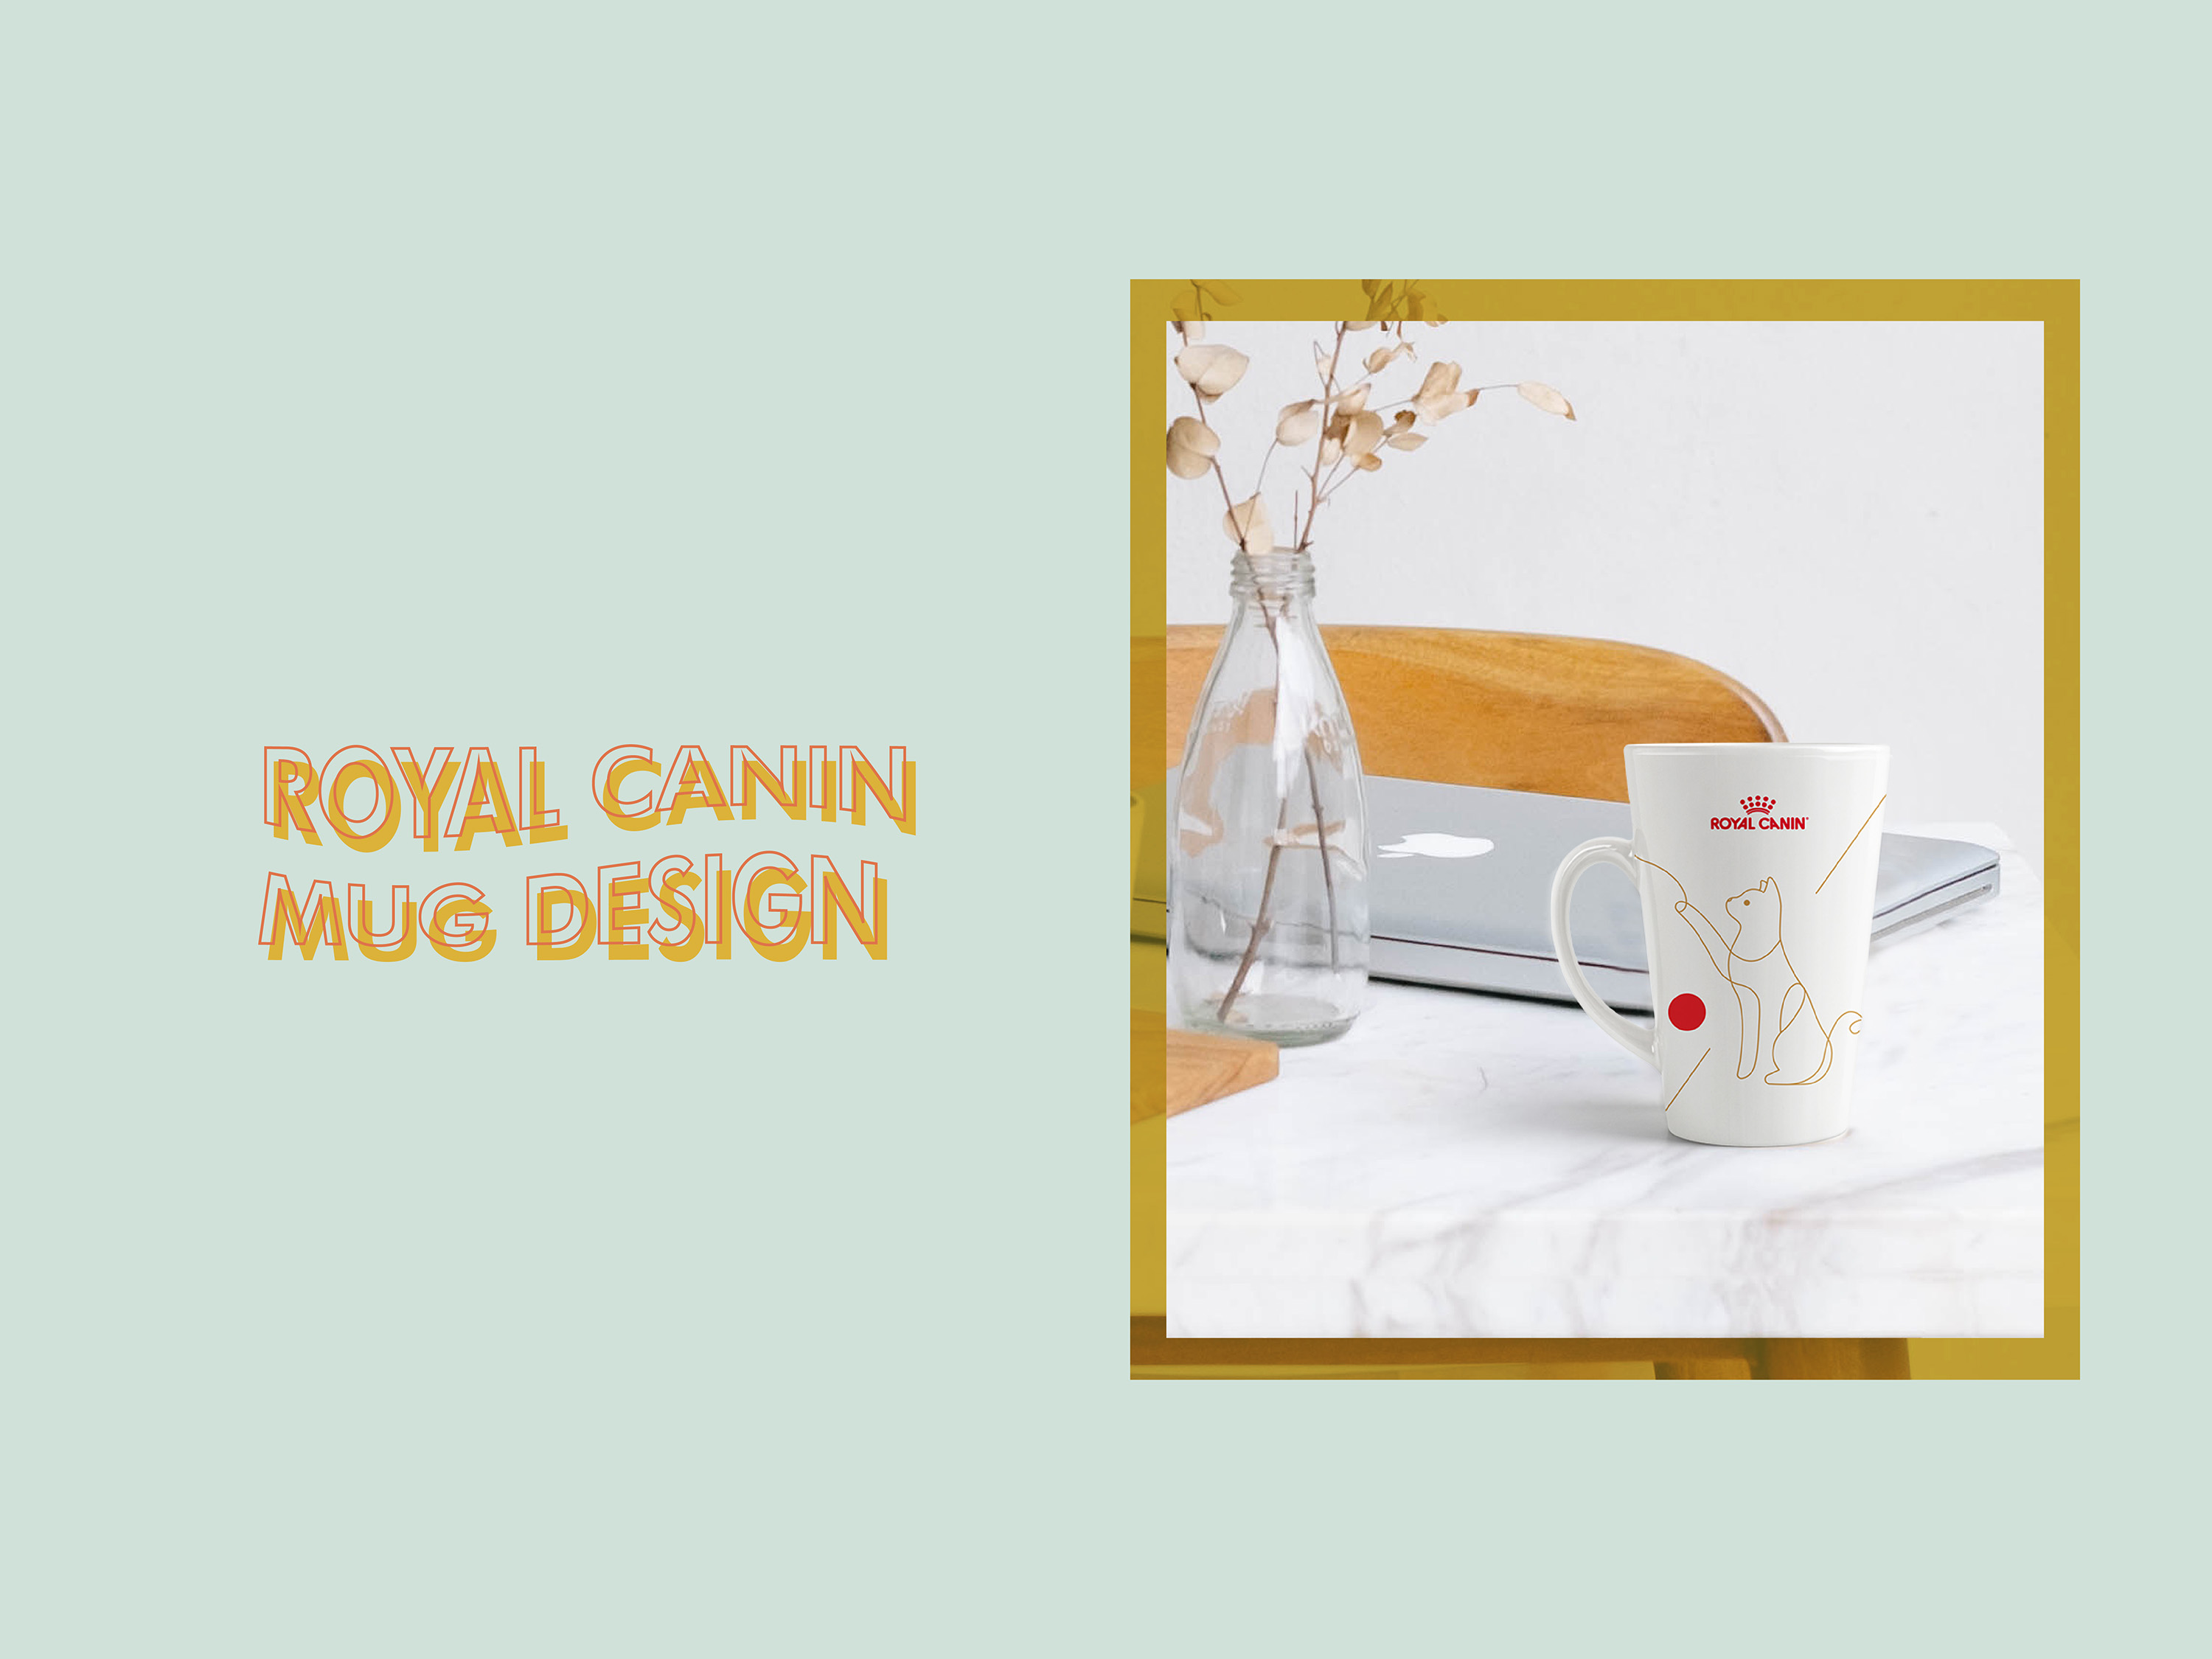 White Royal Canin mug design featuring a cat in line drawing with bold elements on marble table with laptop and flowers in a glass